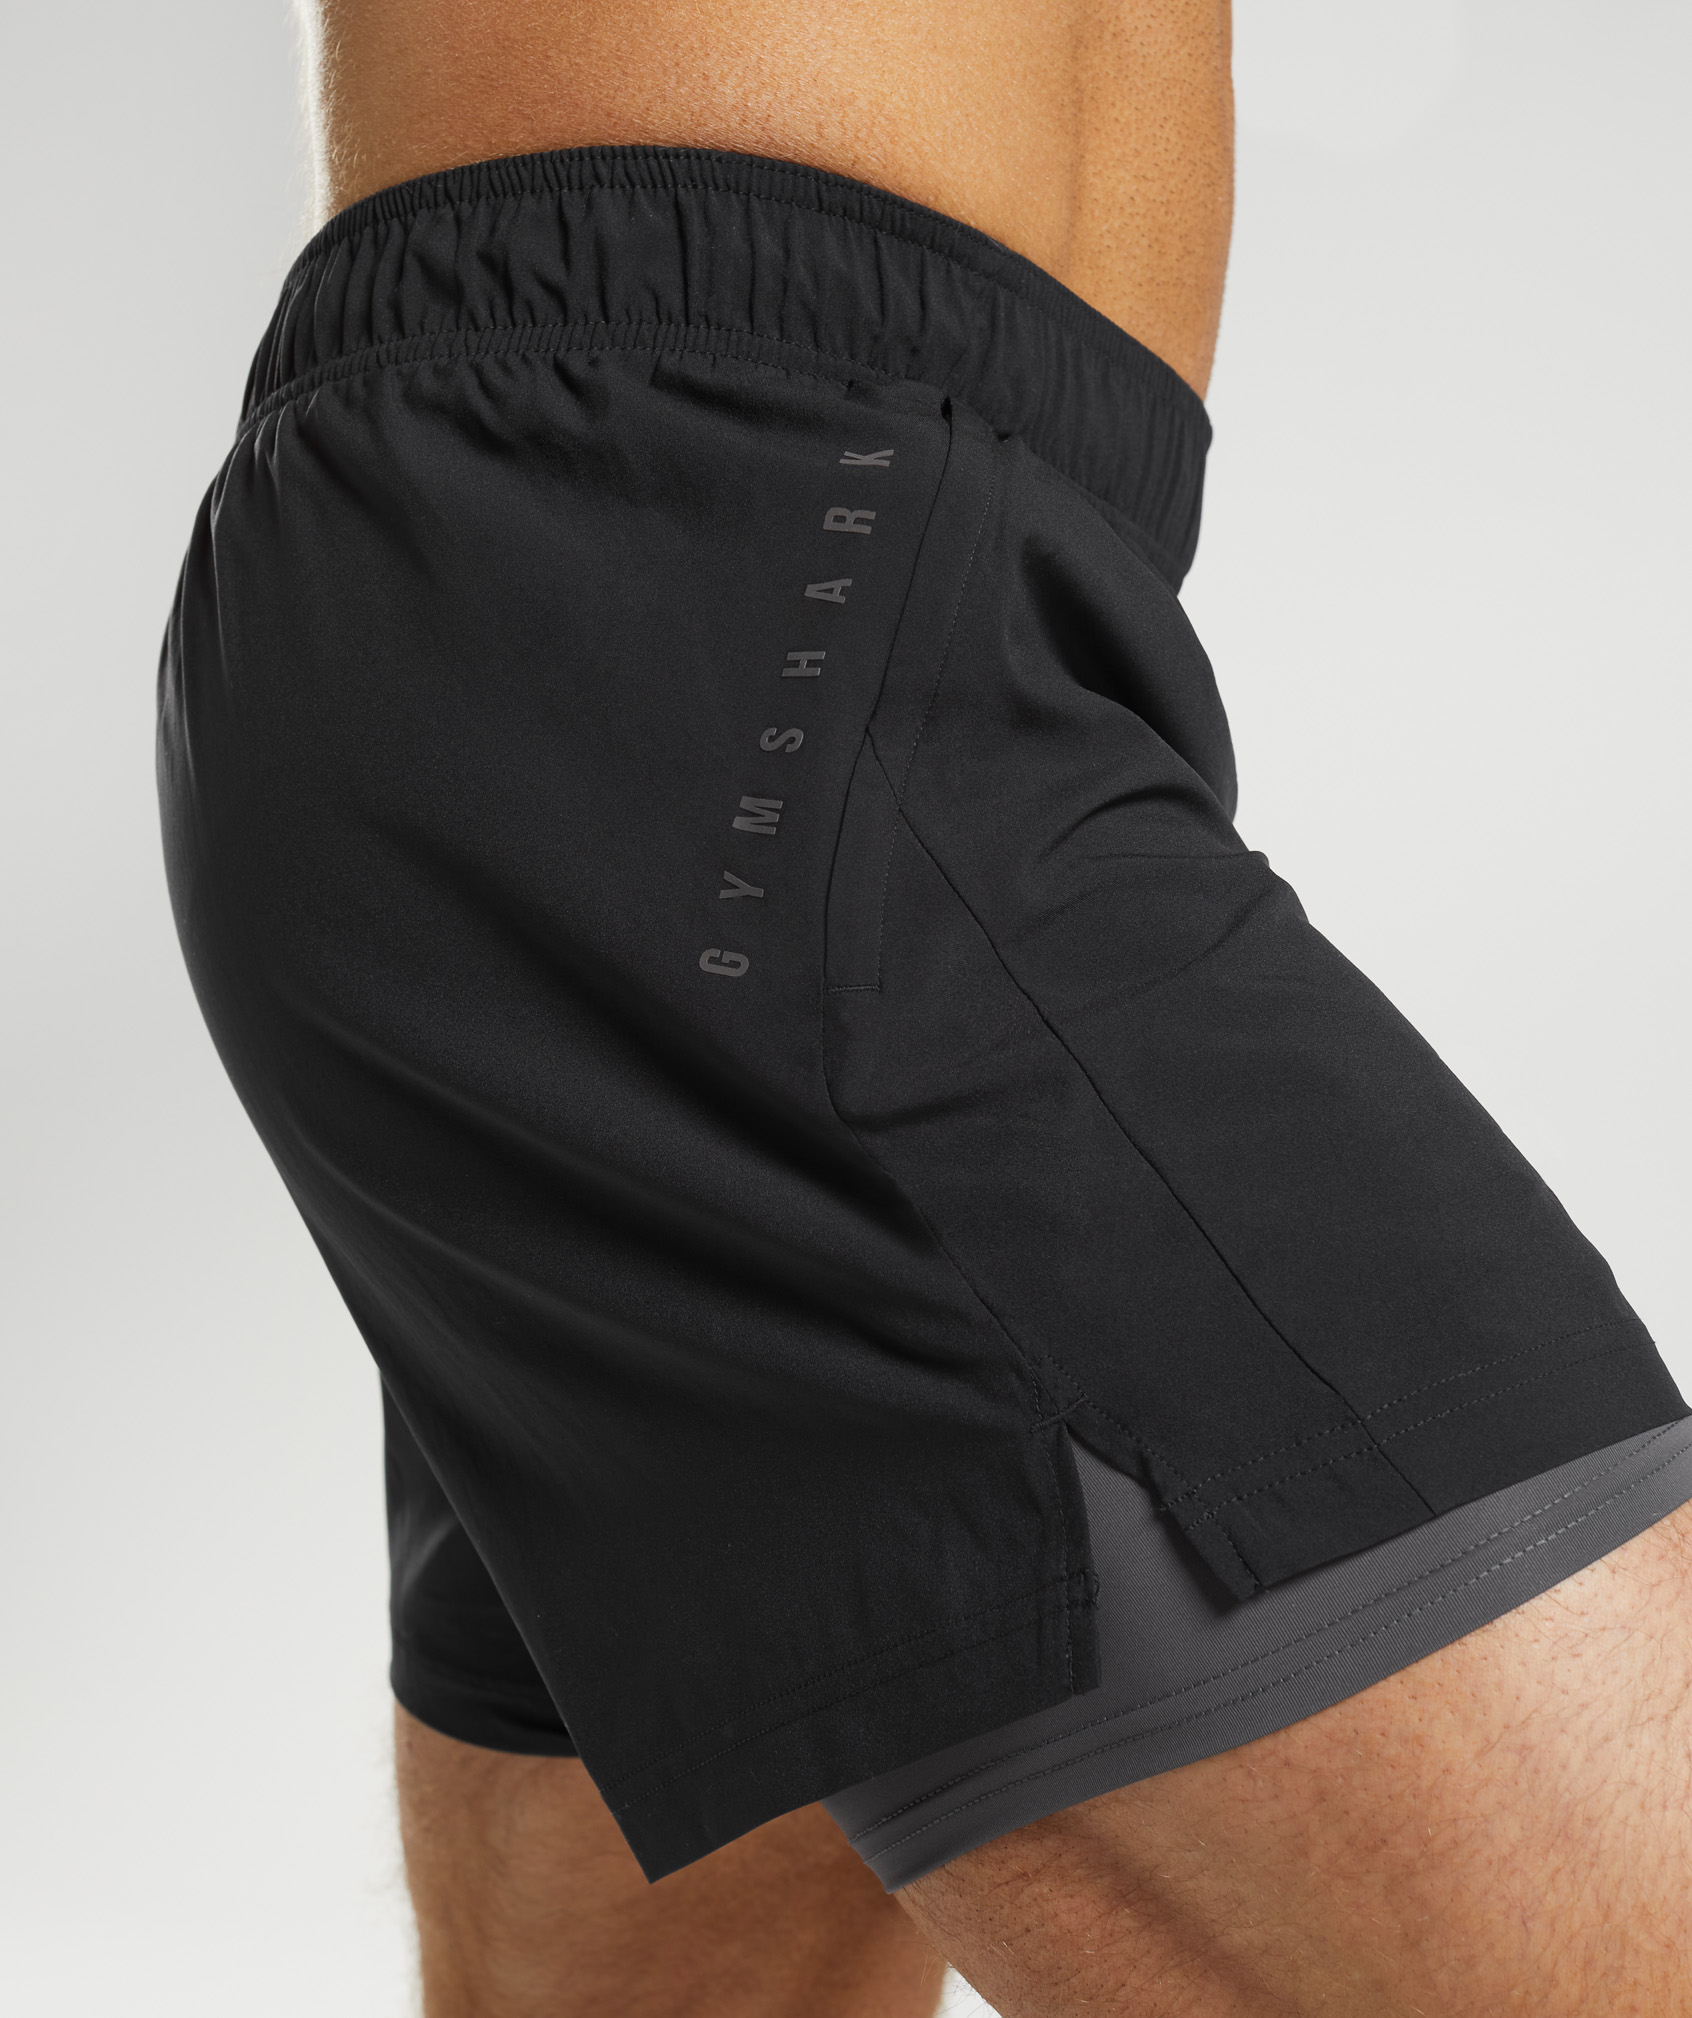 The joy of short shorts: 'Nothing screams liberation like a breeze on your  thigh', Men's shorts